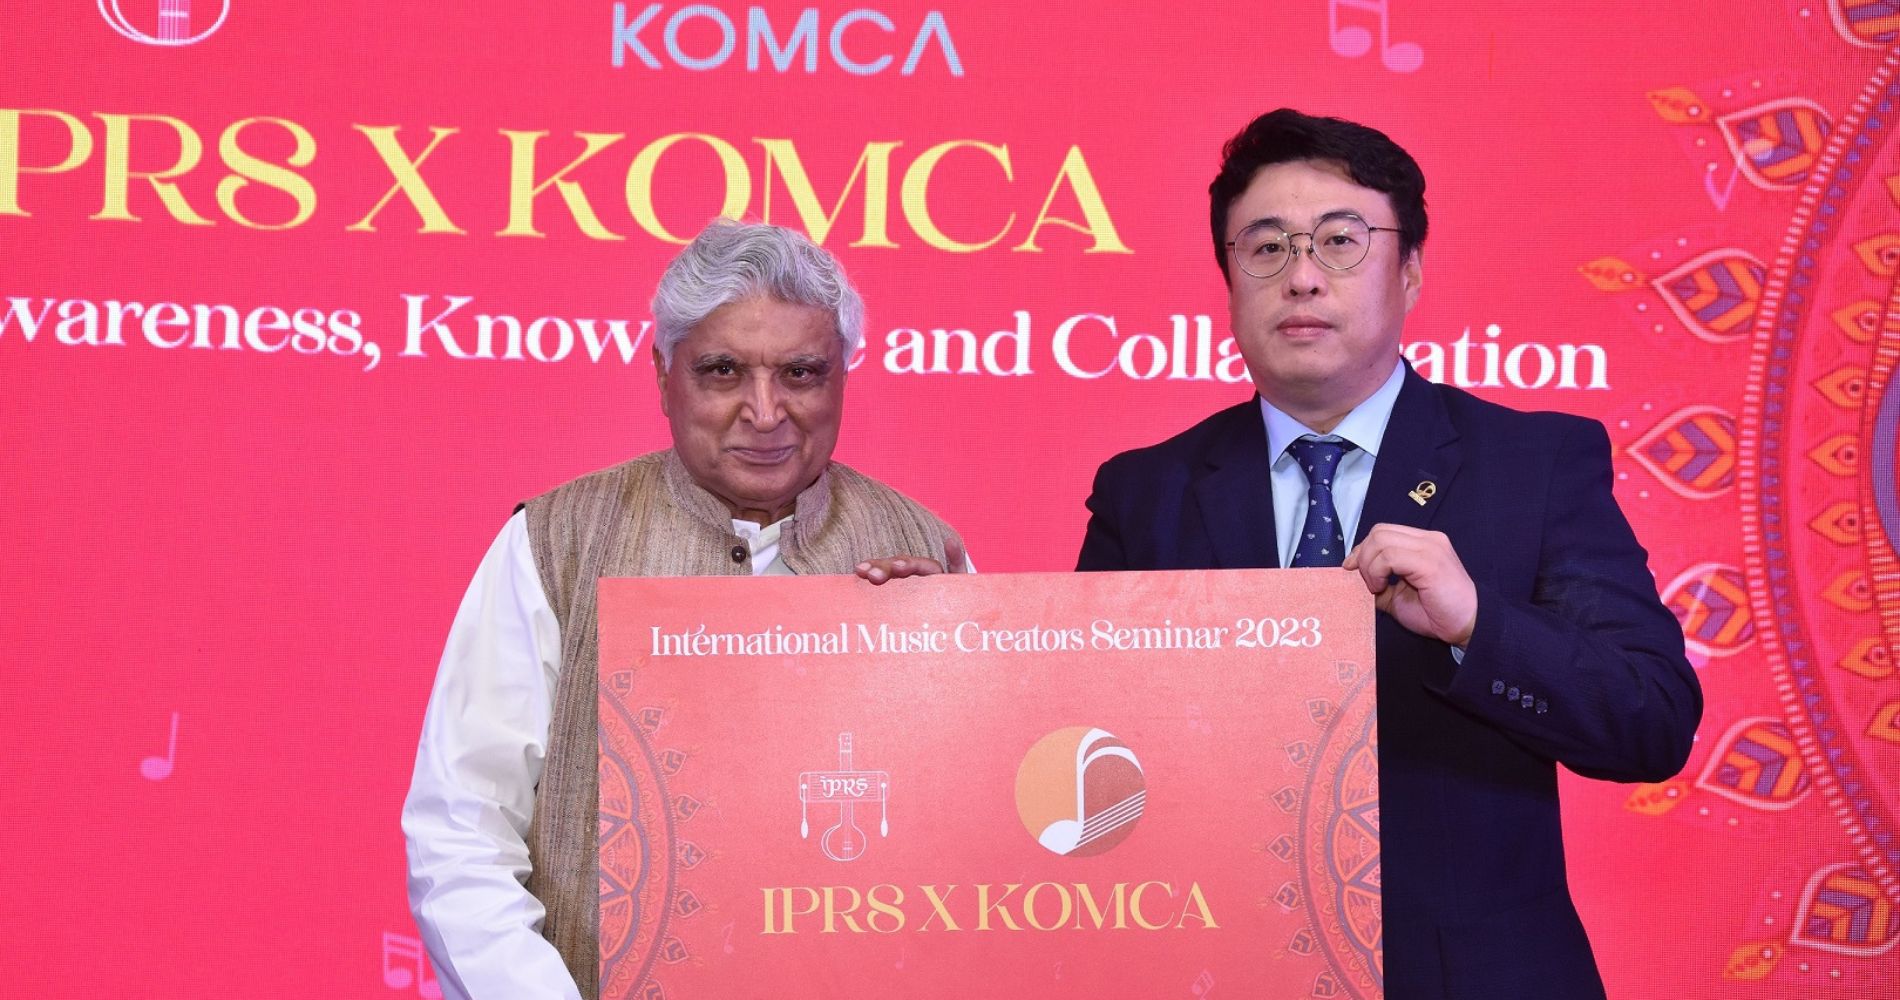 India And Korea Join Forces: IPRS And KOMCA's MOU Sparks